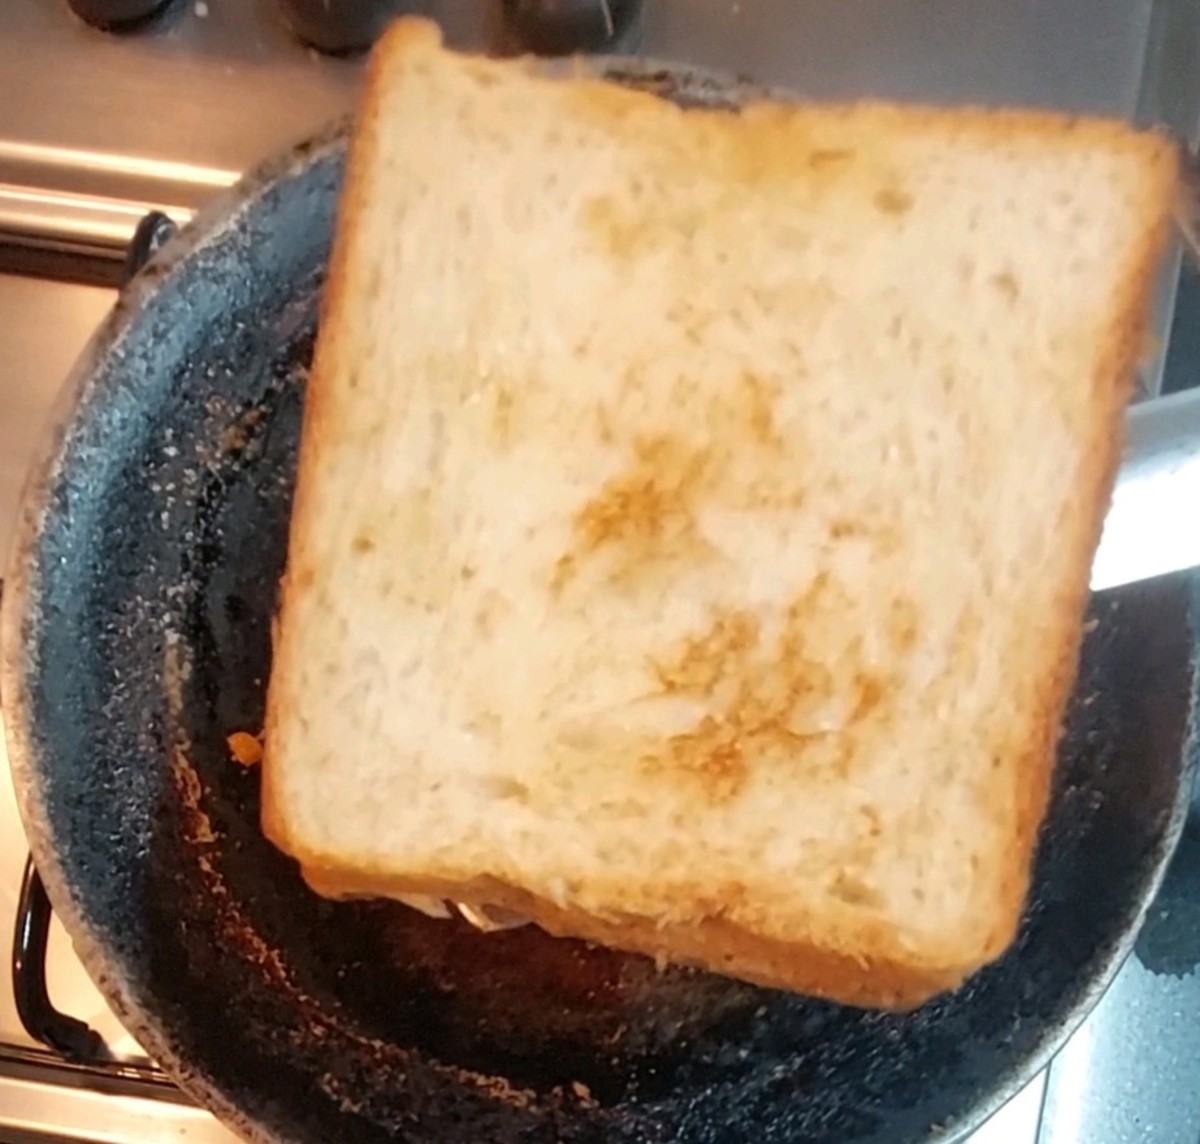 Toast over medium flame till golden brown. Sprinkle 1 teaspoon of ghee on top of the bread slice and toast on the other side, too. Take out when done.